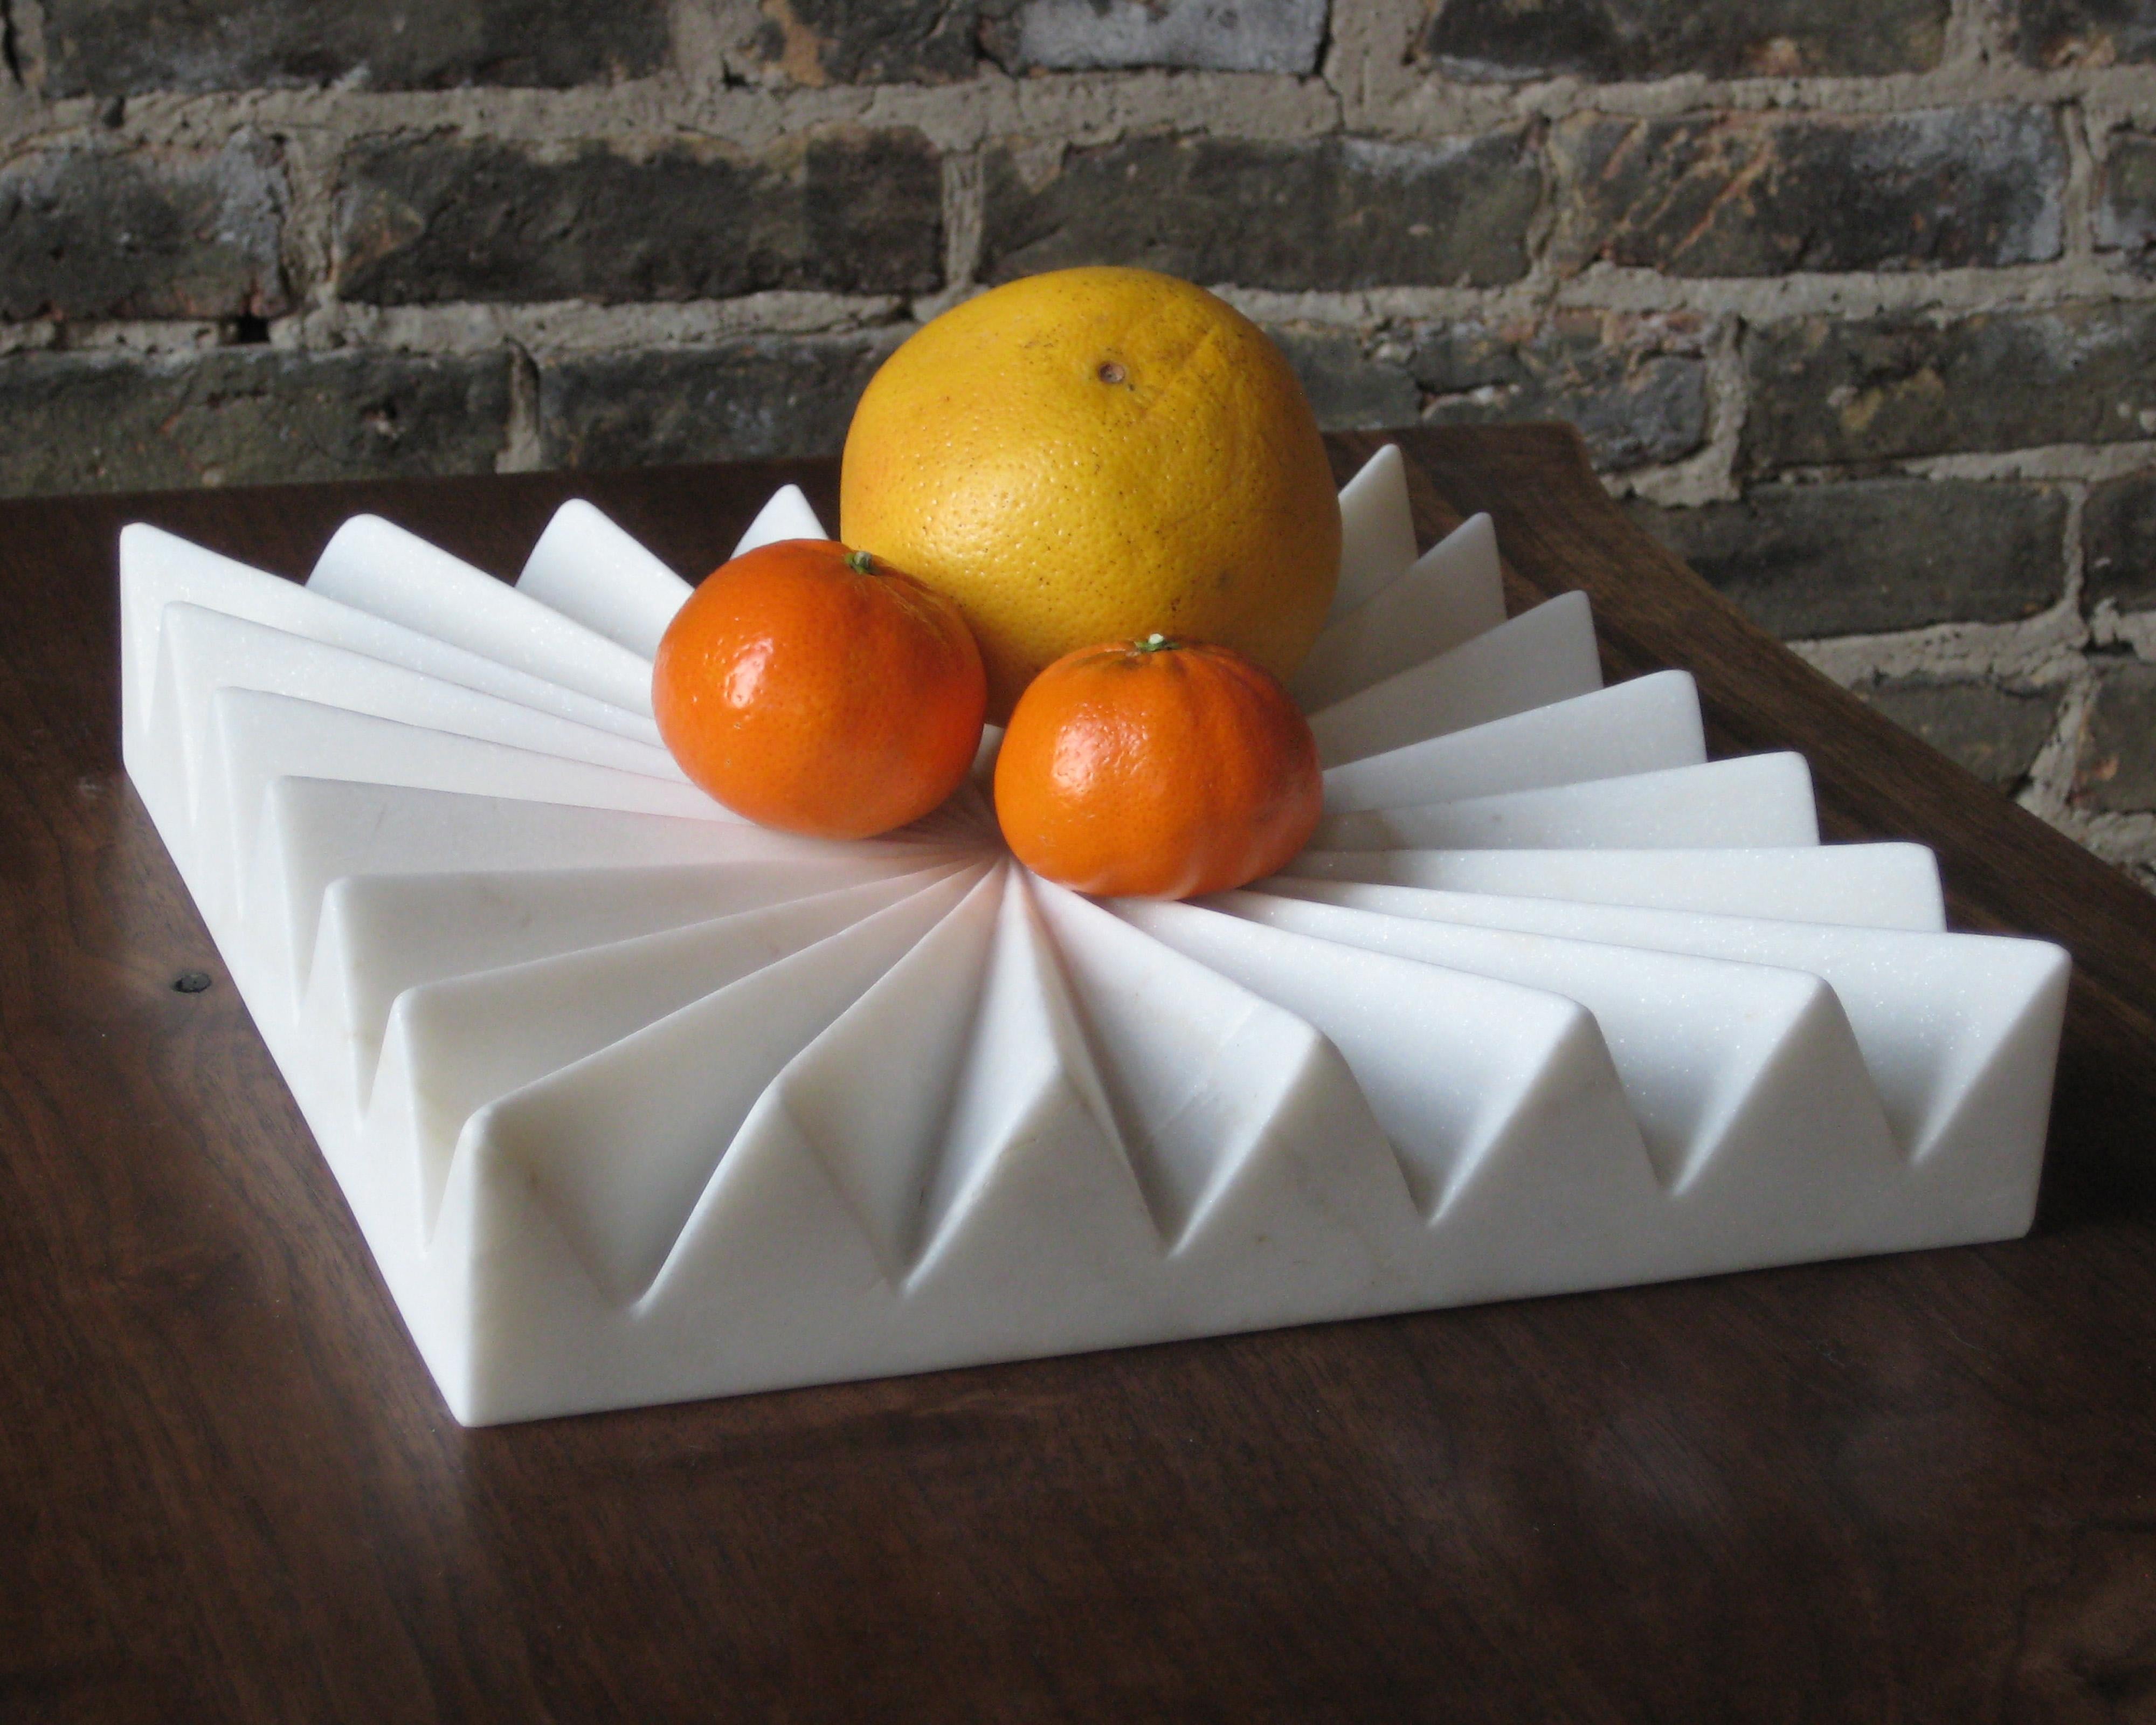 The spines of this fruit tray allow air circulate around fruit, extending its freshness. This tray is hand-carved by traditional stone artisans in Rajasthan State, India.

Founded in 2011, AKMD developed out of a thirteen-year friendship and design